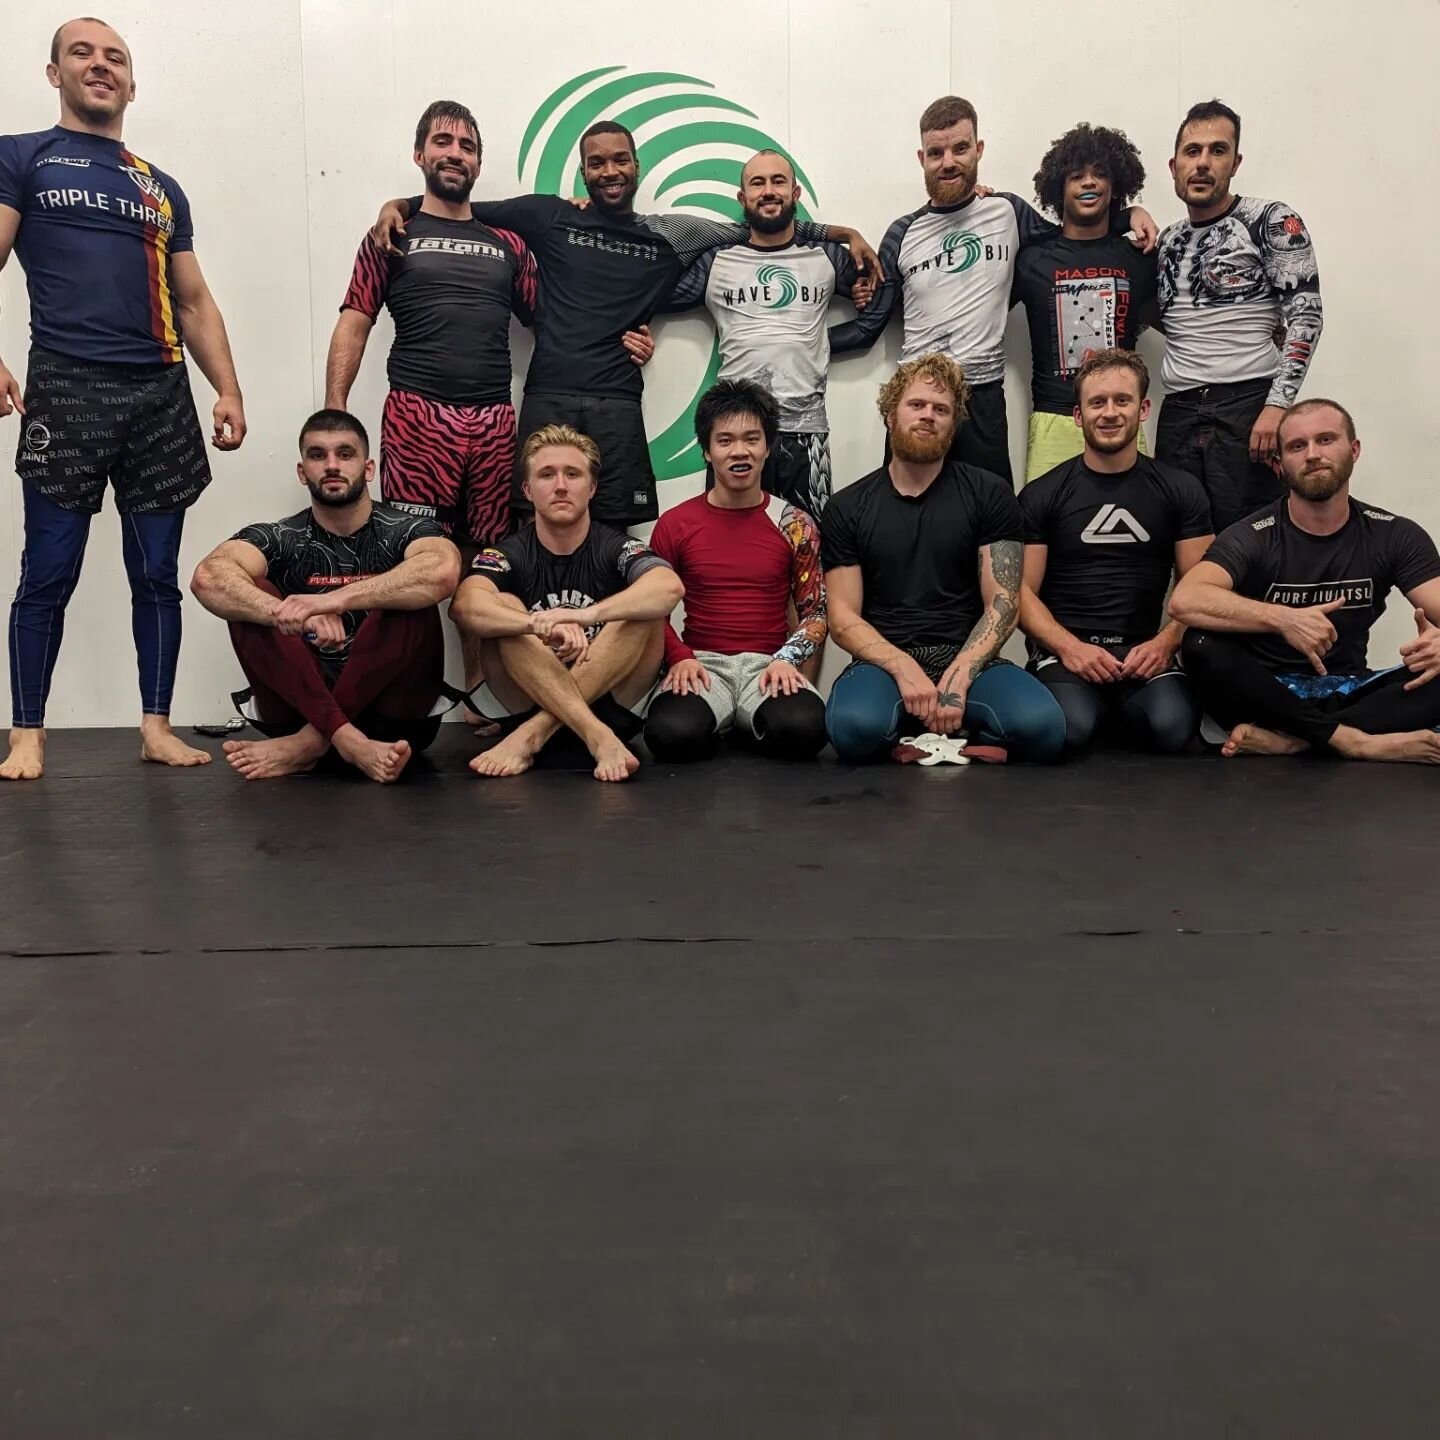 It's good to have @eoghanoflanagan back down for No Gi Friday nights! 

After an amazing performance at @adcc_official Eoghan will be teaching Fridays at 6.30pm. make sure to come down to learn from one of the best in the world 🔥🔥🔥
.
.
.
.
.
#thew